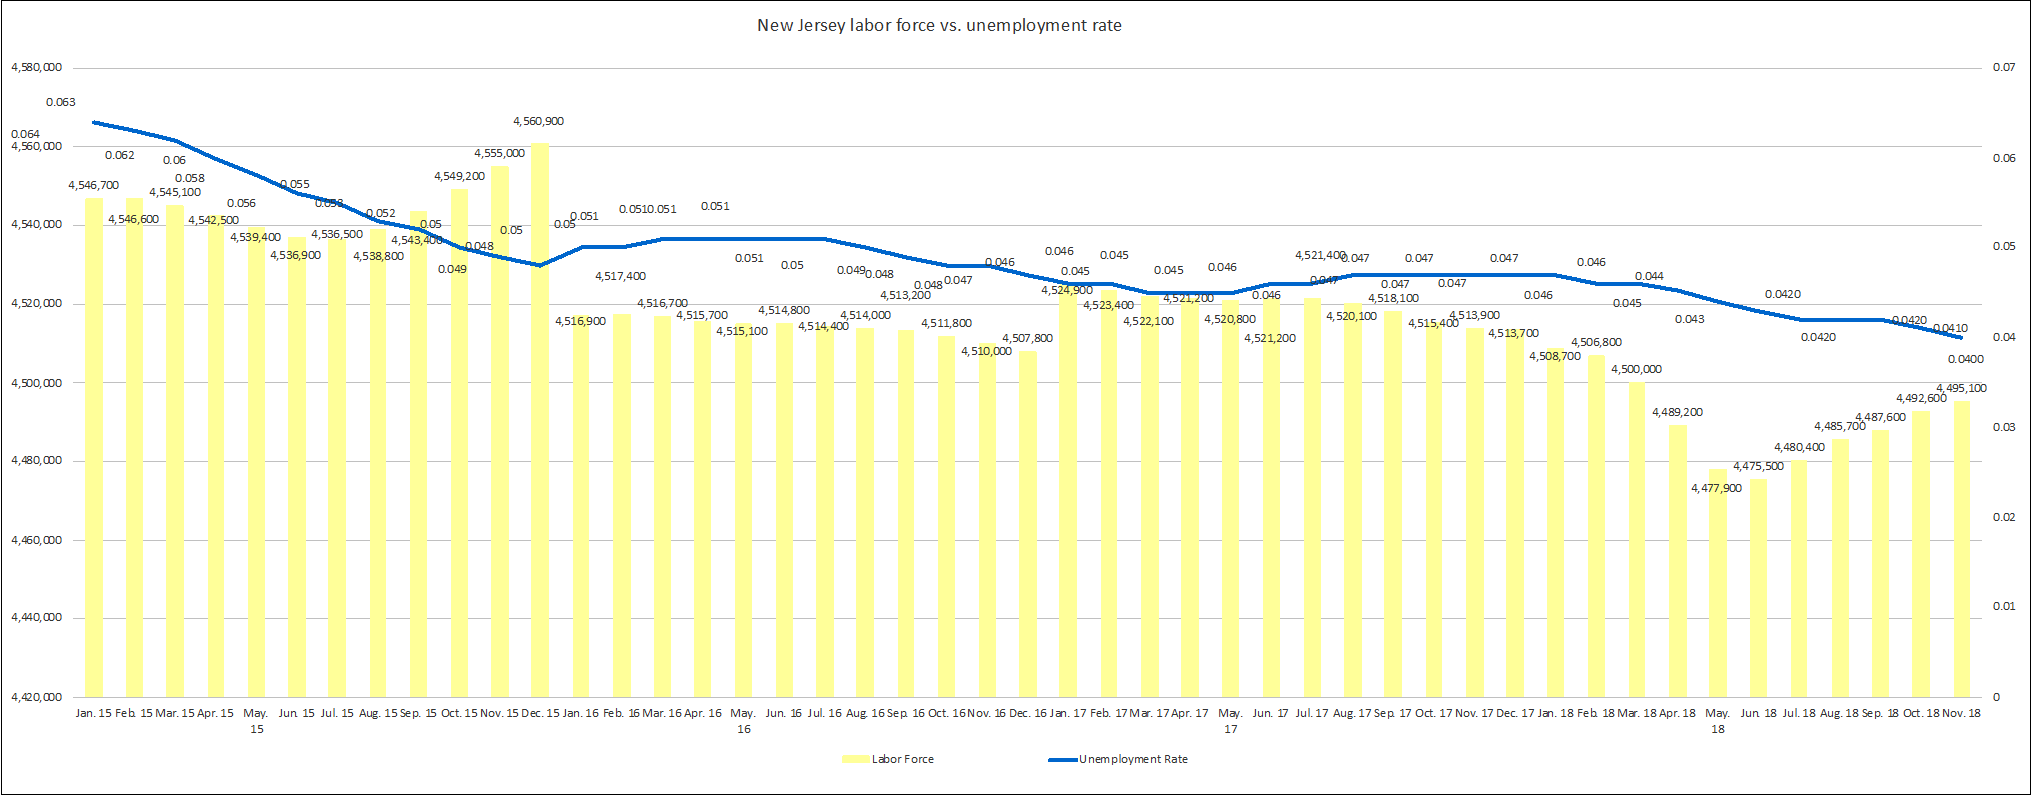 New Jersey Labor Force vs. Unemployment Rate, 1/15 - 11/18